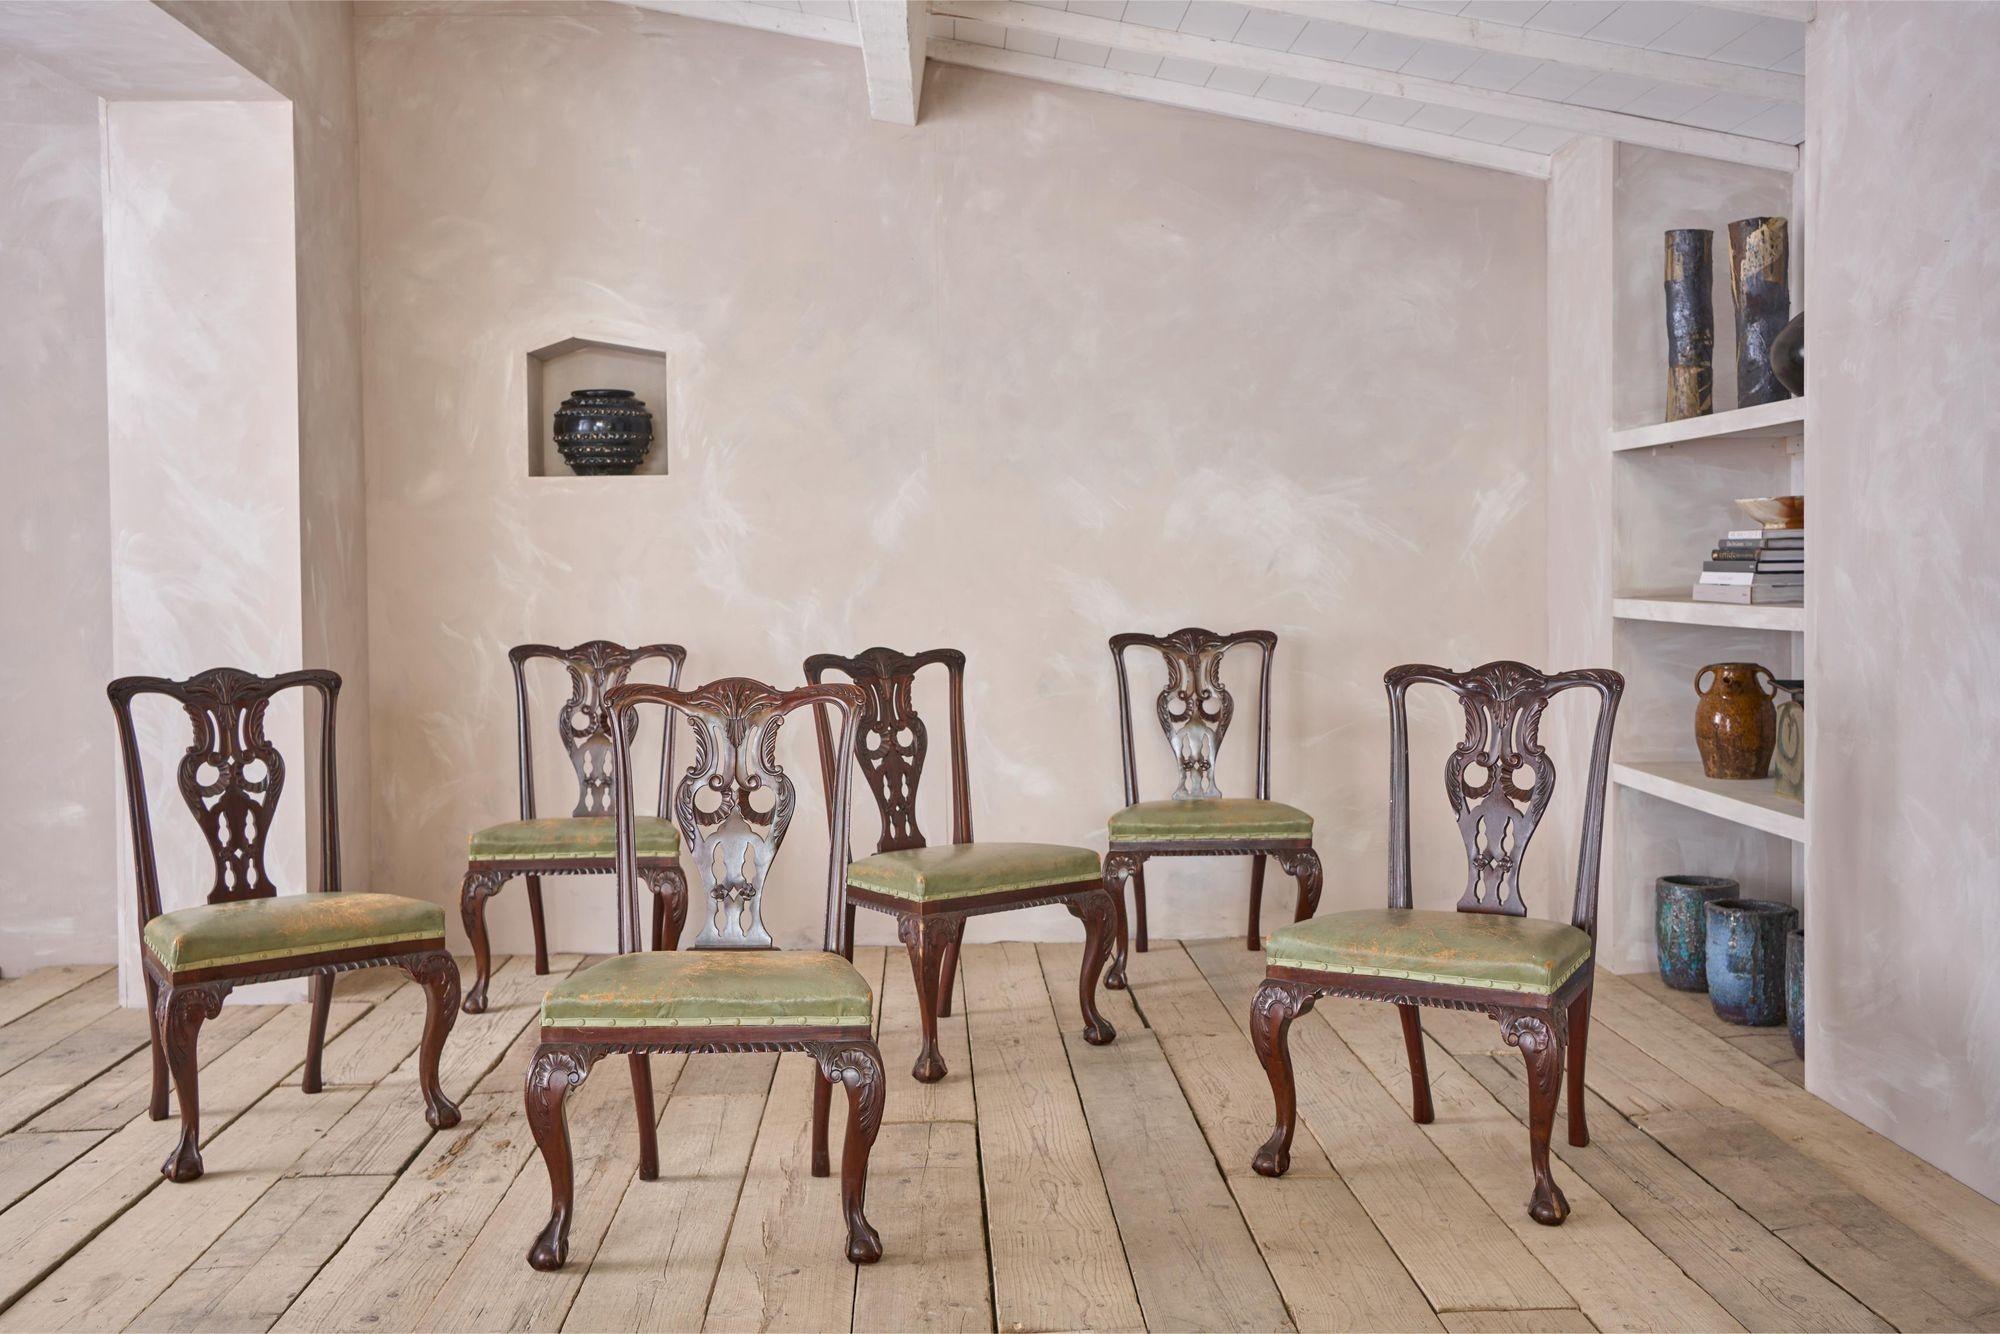 These are a fabulous set of c.1900 Jas Shoolbred dining chairs. Made of mahogany and very much in the Georgian style. The carved detail is very nicely done and gives these an extremely impressive design which is accentuated beautifully with the